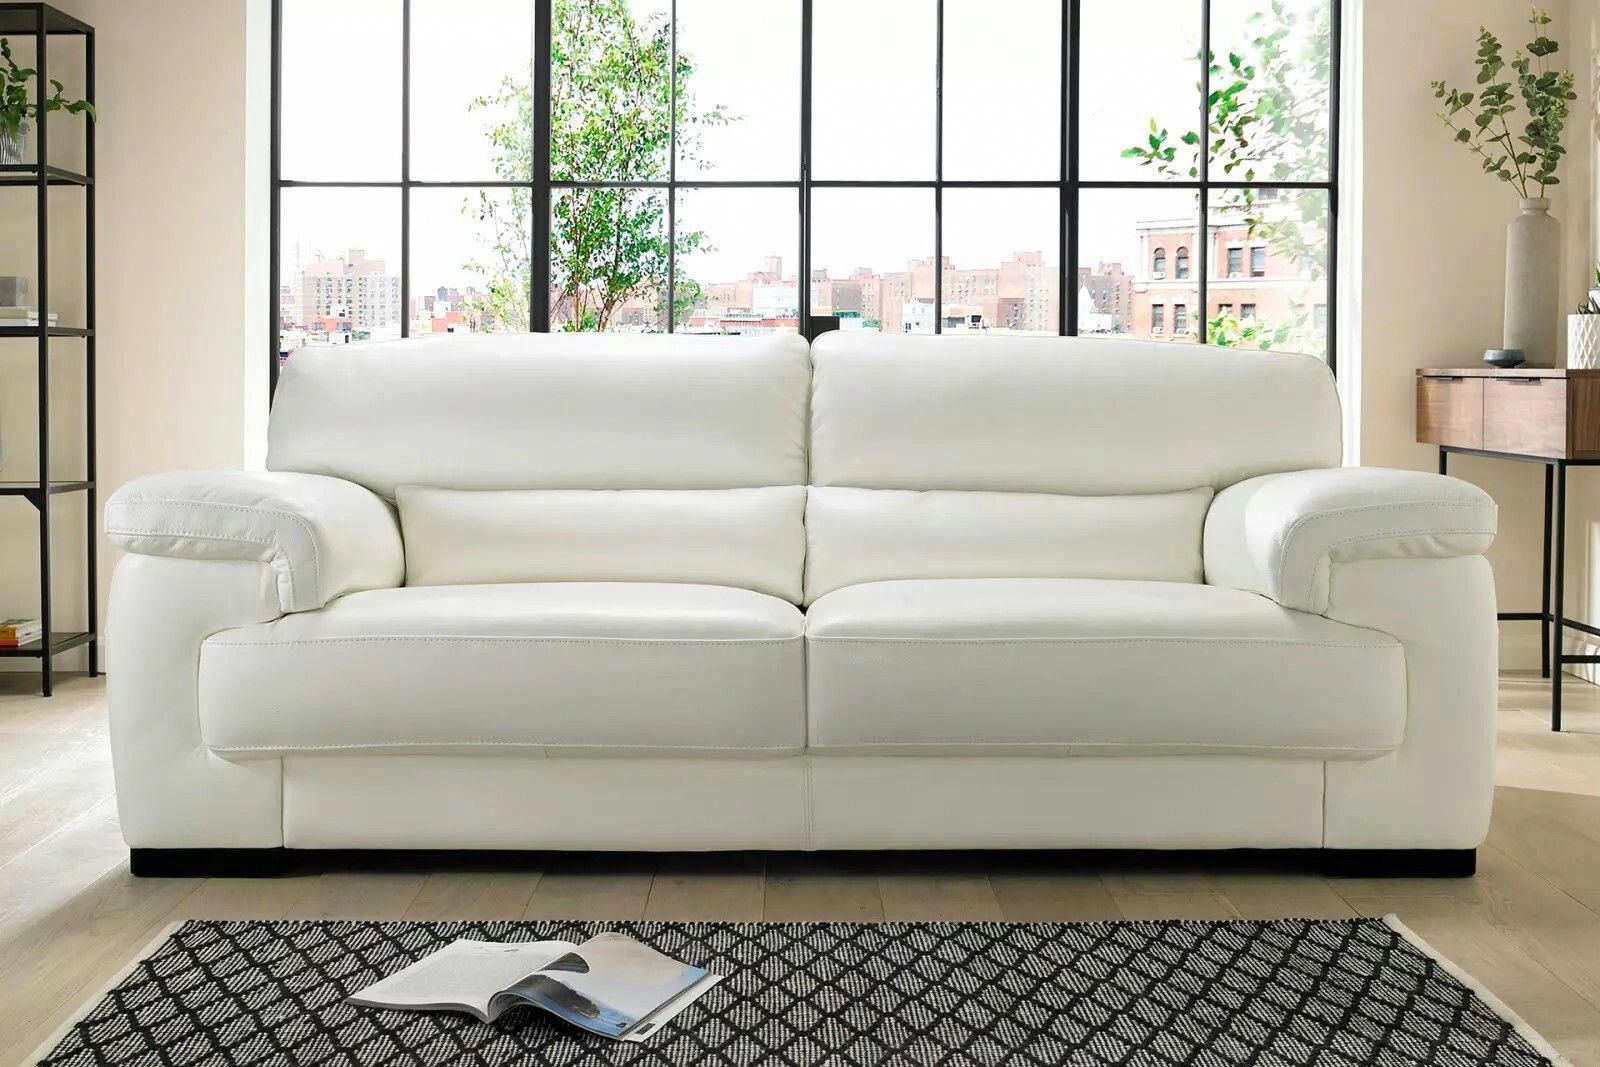 Sofa Online (with Images) | Leather Sofa, Sofa, White For White Grained Wood Hexagonal Console Tables (View 7 of 20)